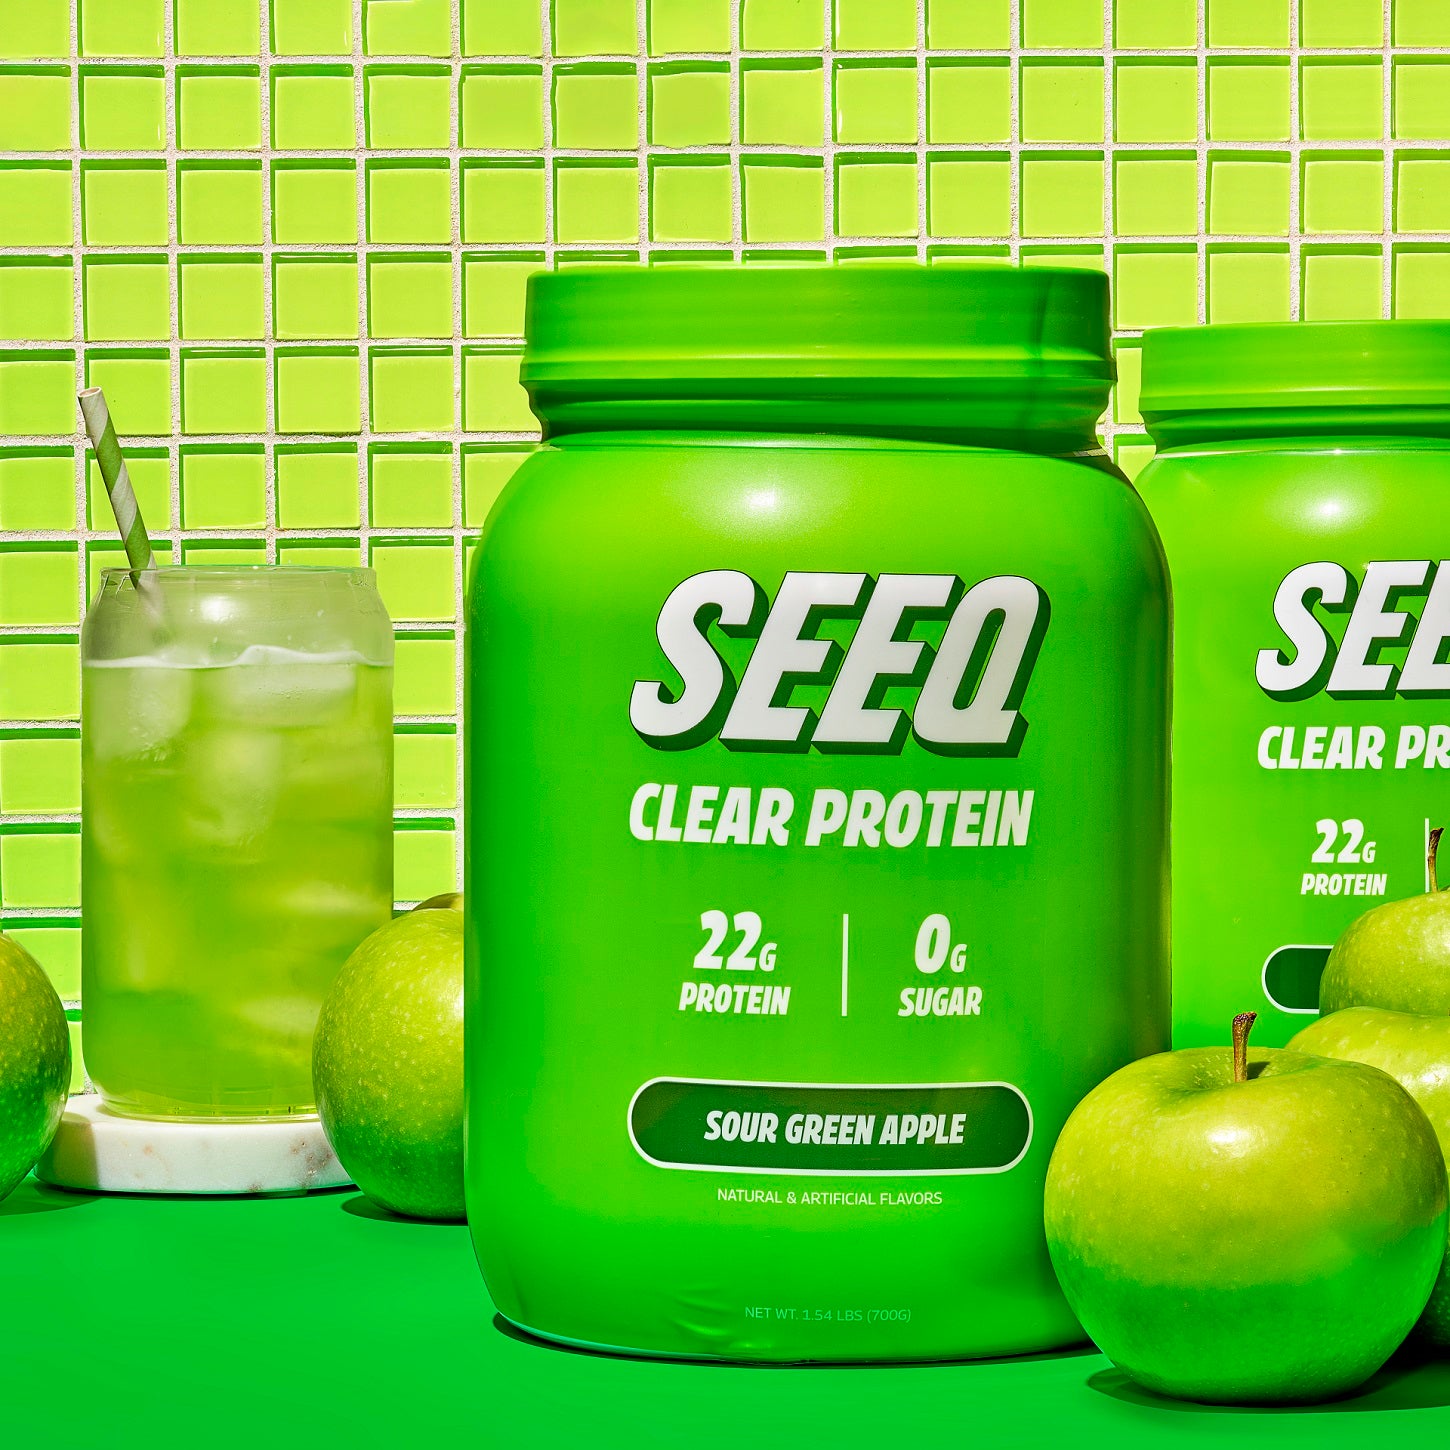 SEEQ  Clear Whey Isolate Protein